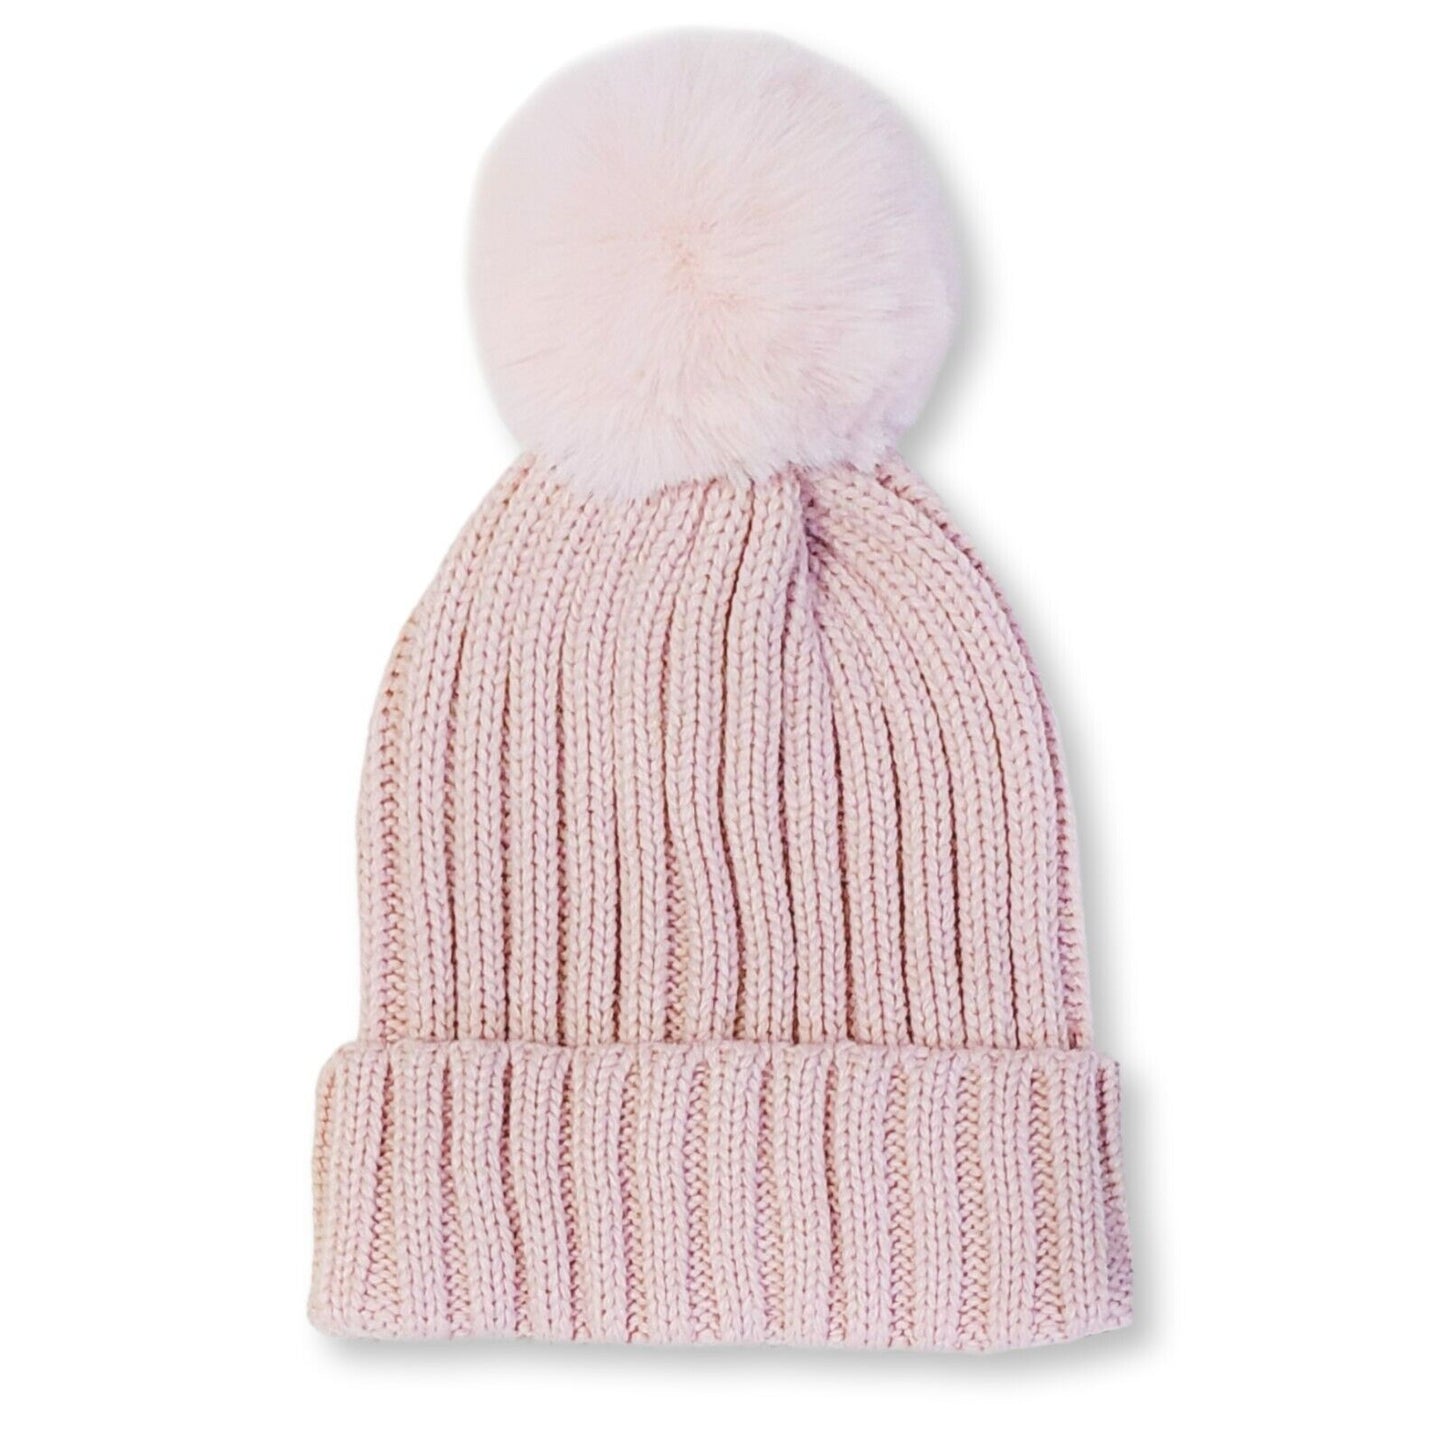 Vince Camuto Faux Fur Pom Beanie Hat with Gift Box